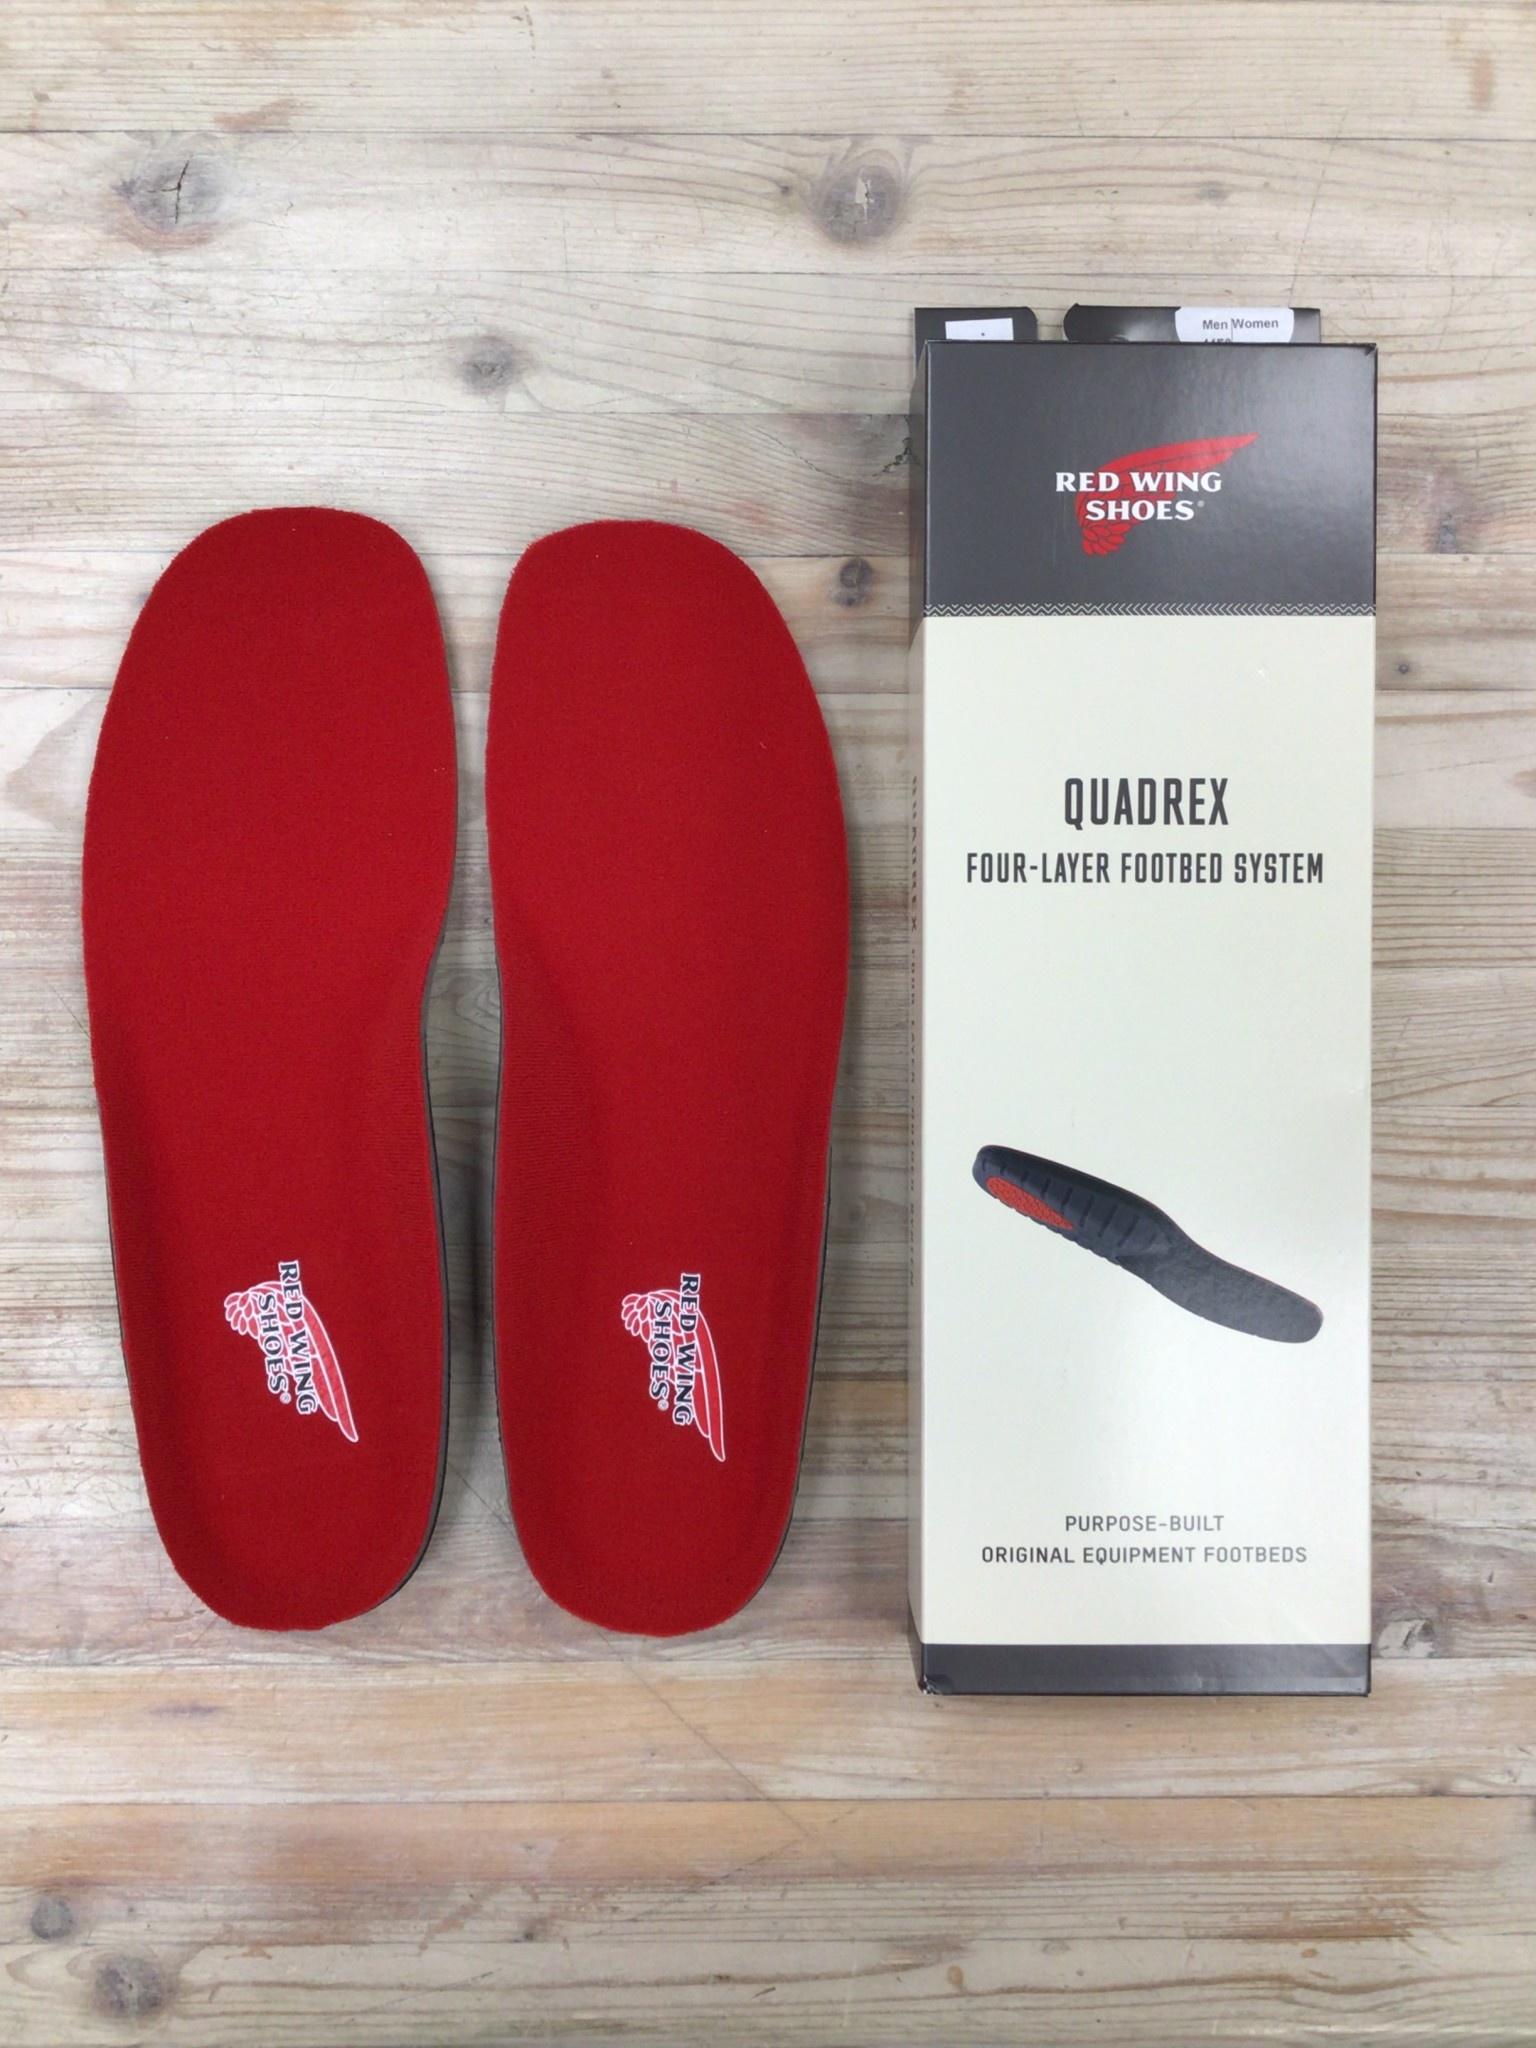 Available In Store ONLY - Red Wing 96358 Quadrex Four-Layer Footbed ...